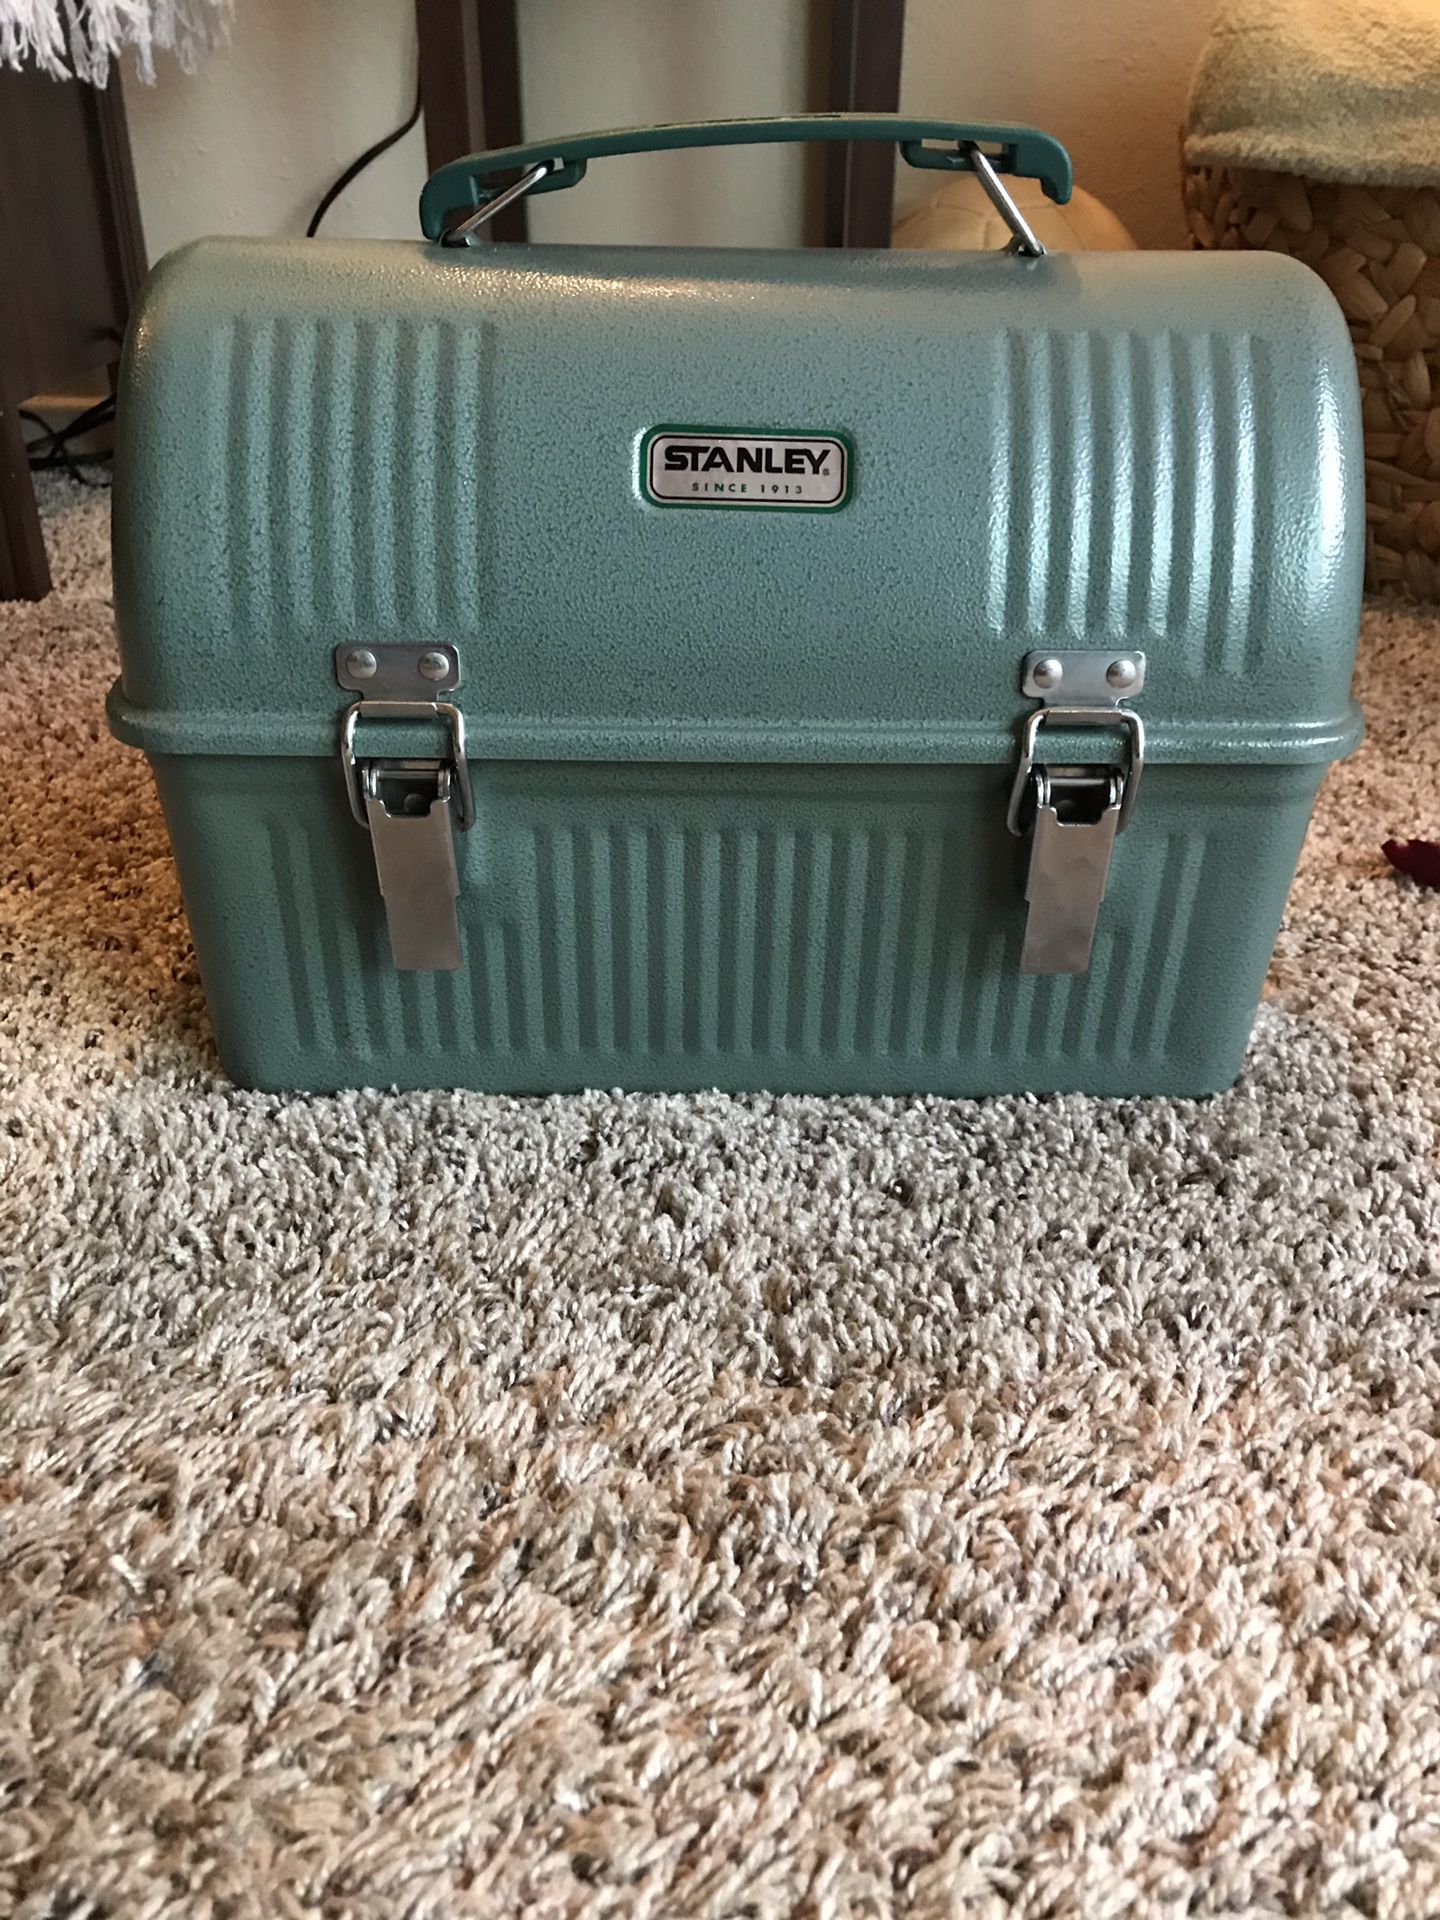 STANLEY LUNCH BOX! Brand New! Old School Style! for Sale in